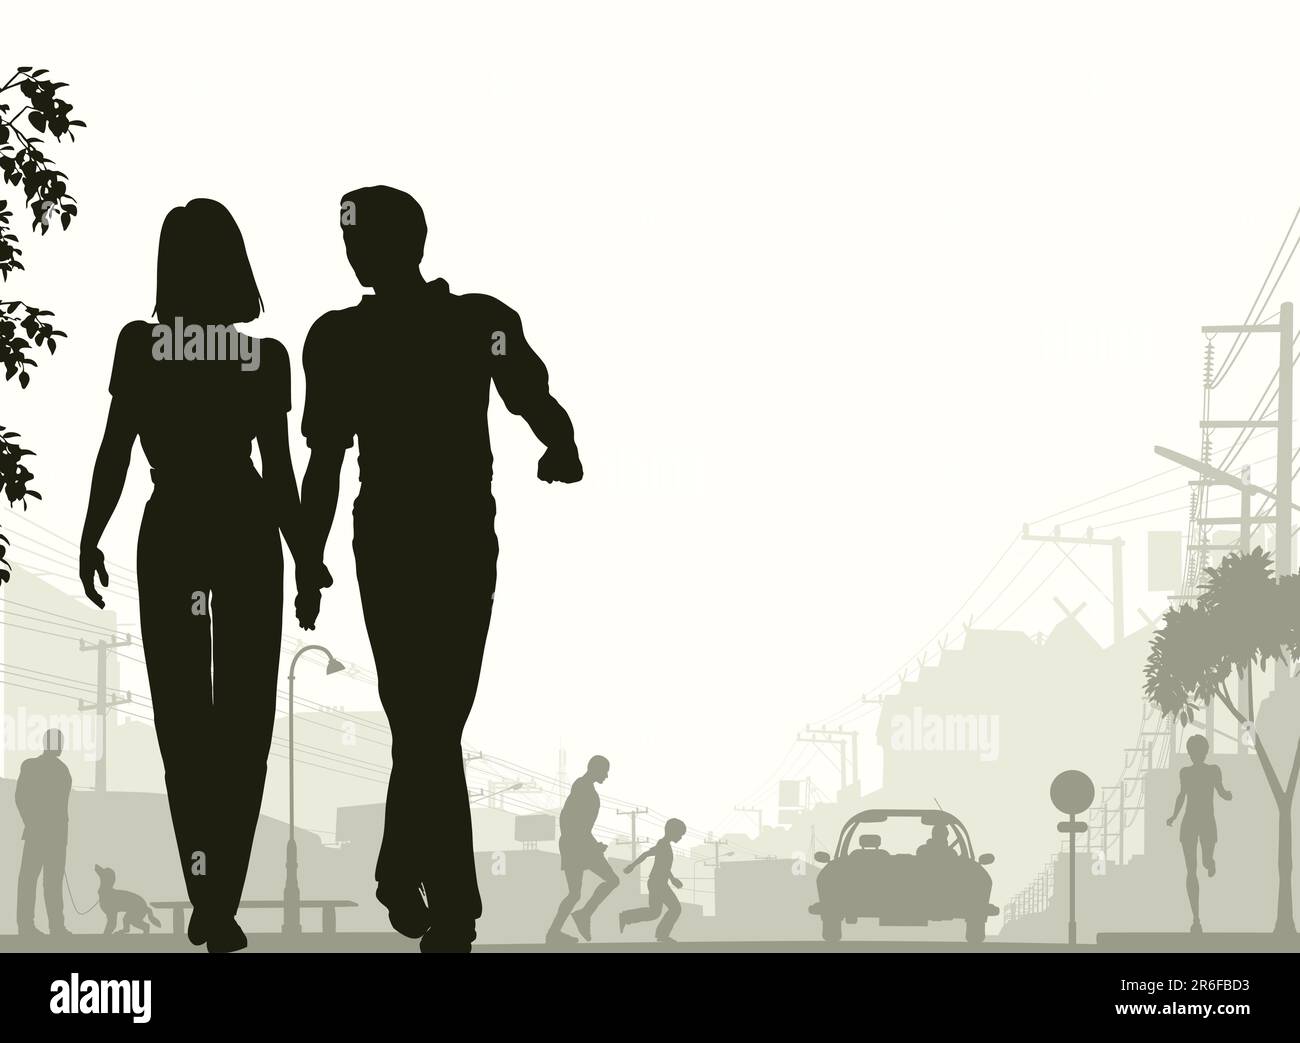 Editable vector silhouette of a couple walking down a street with all silhouette elements as separate objects. Stock Vector